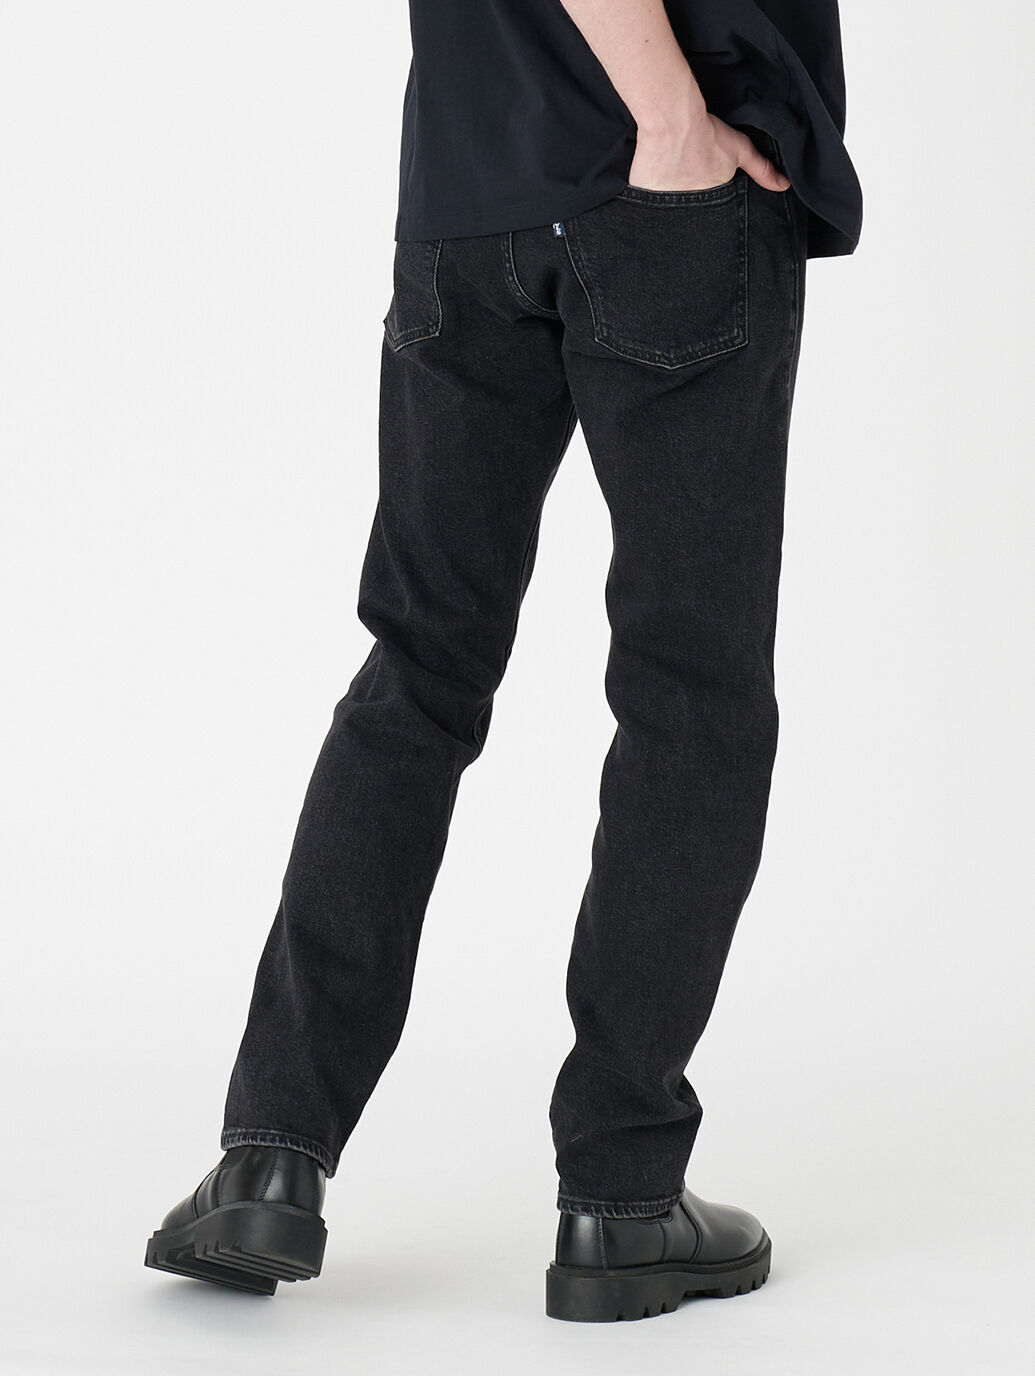 Levi's MADE&CRAFTED 511 SLIM FIT BLACK